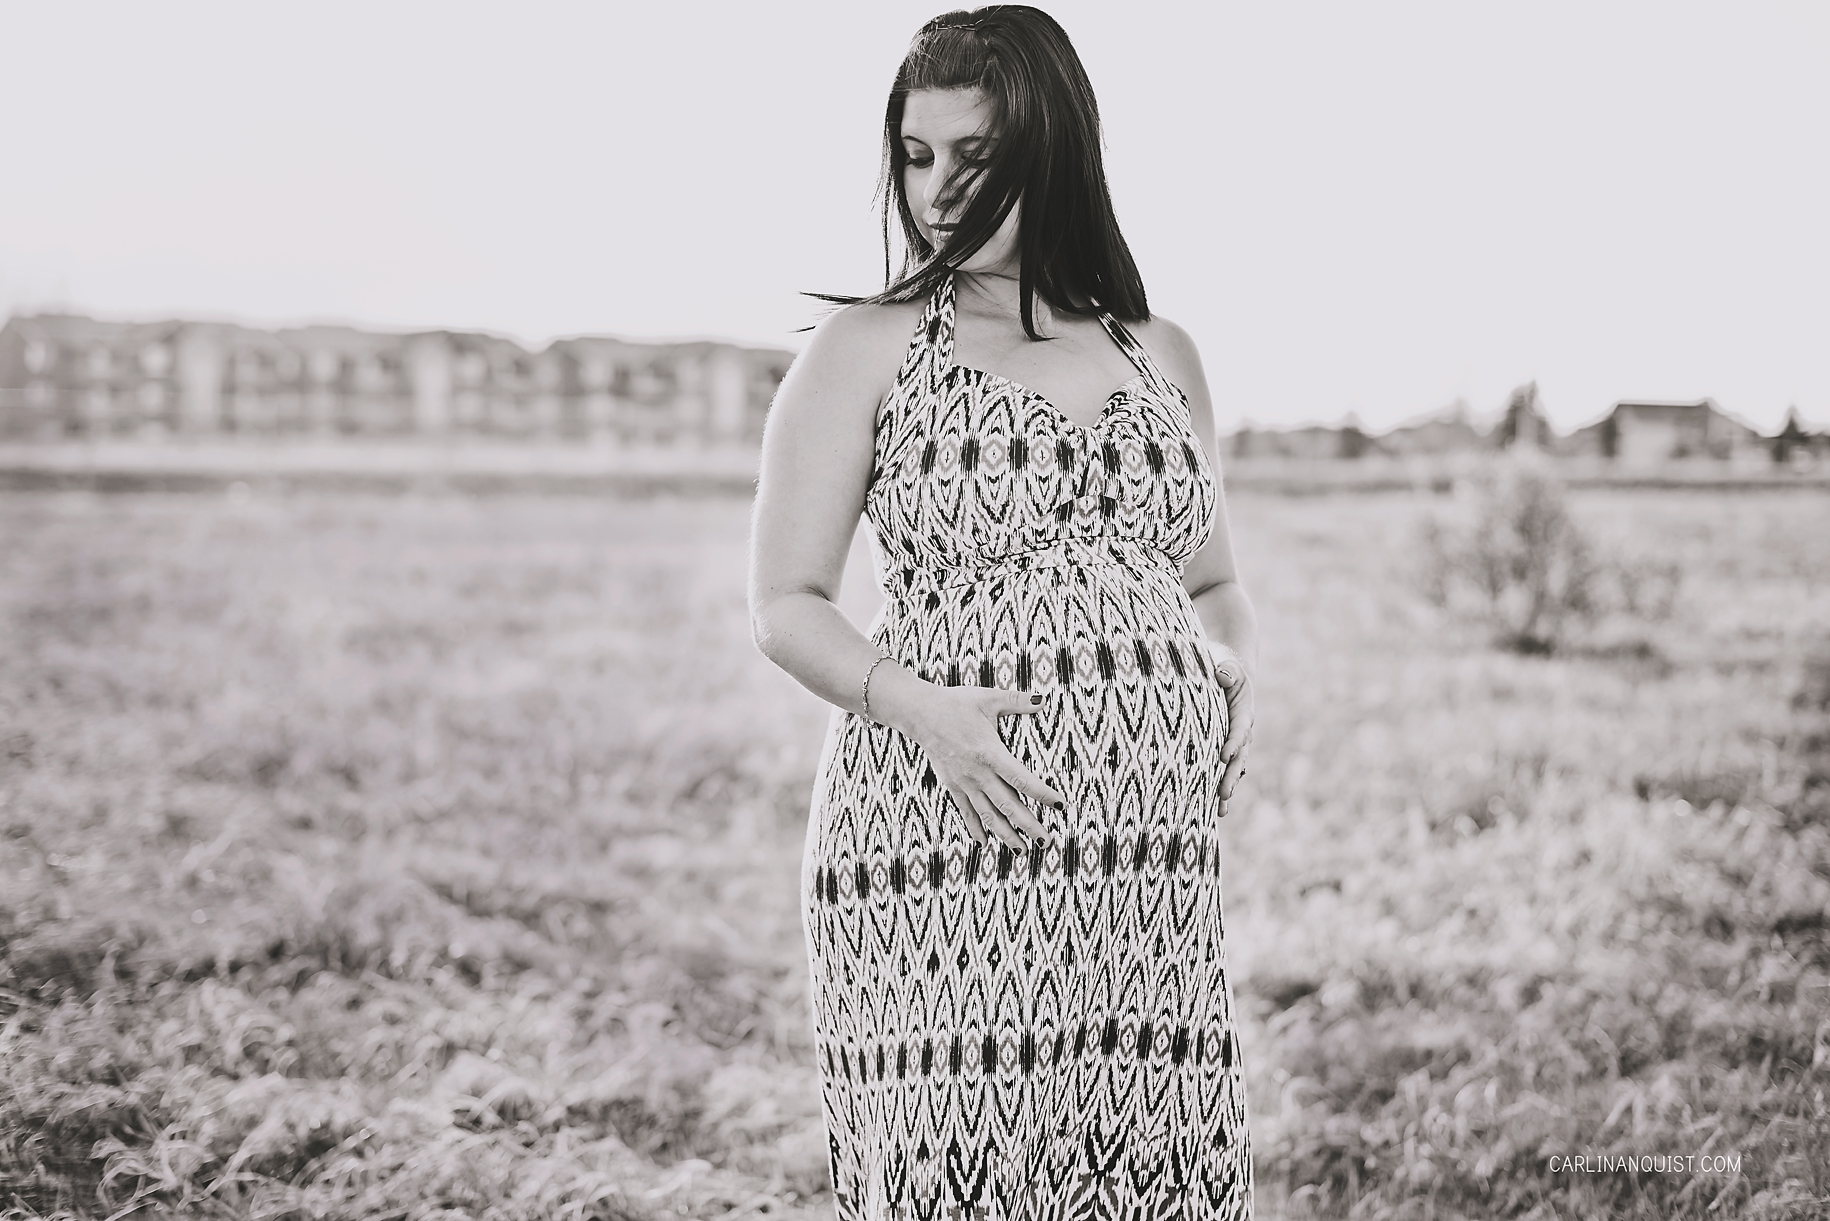 Kids, New Baby, Maternity, Calgary Photographer, Nose Hill Park, Carlin Anquist Photography 